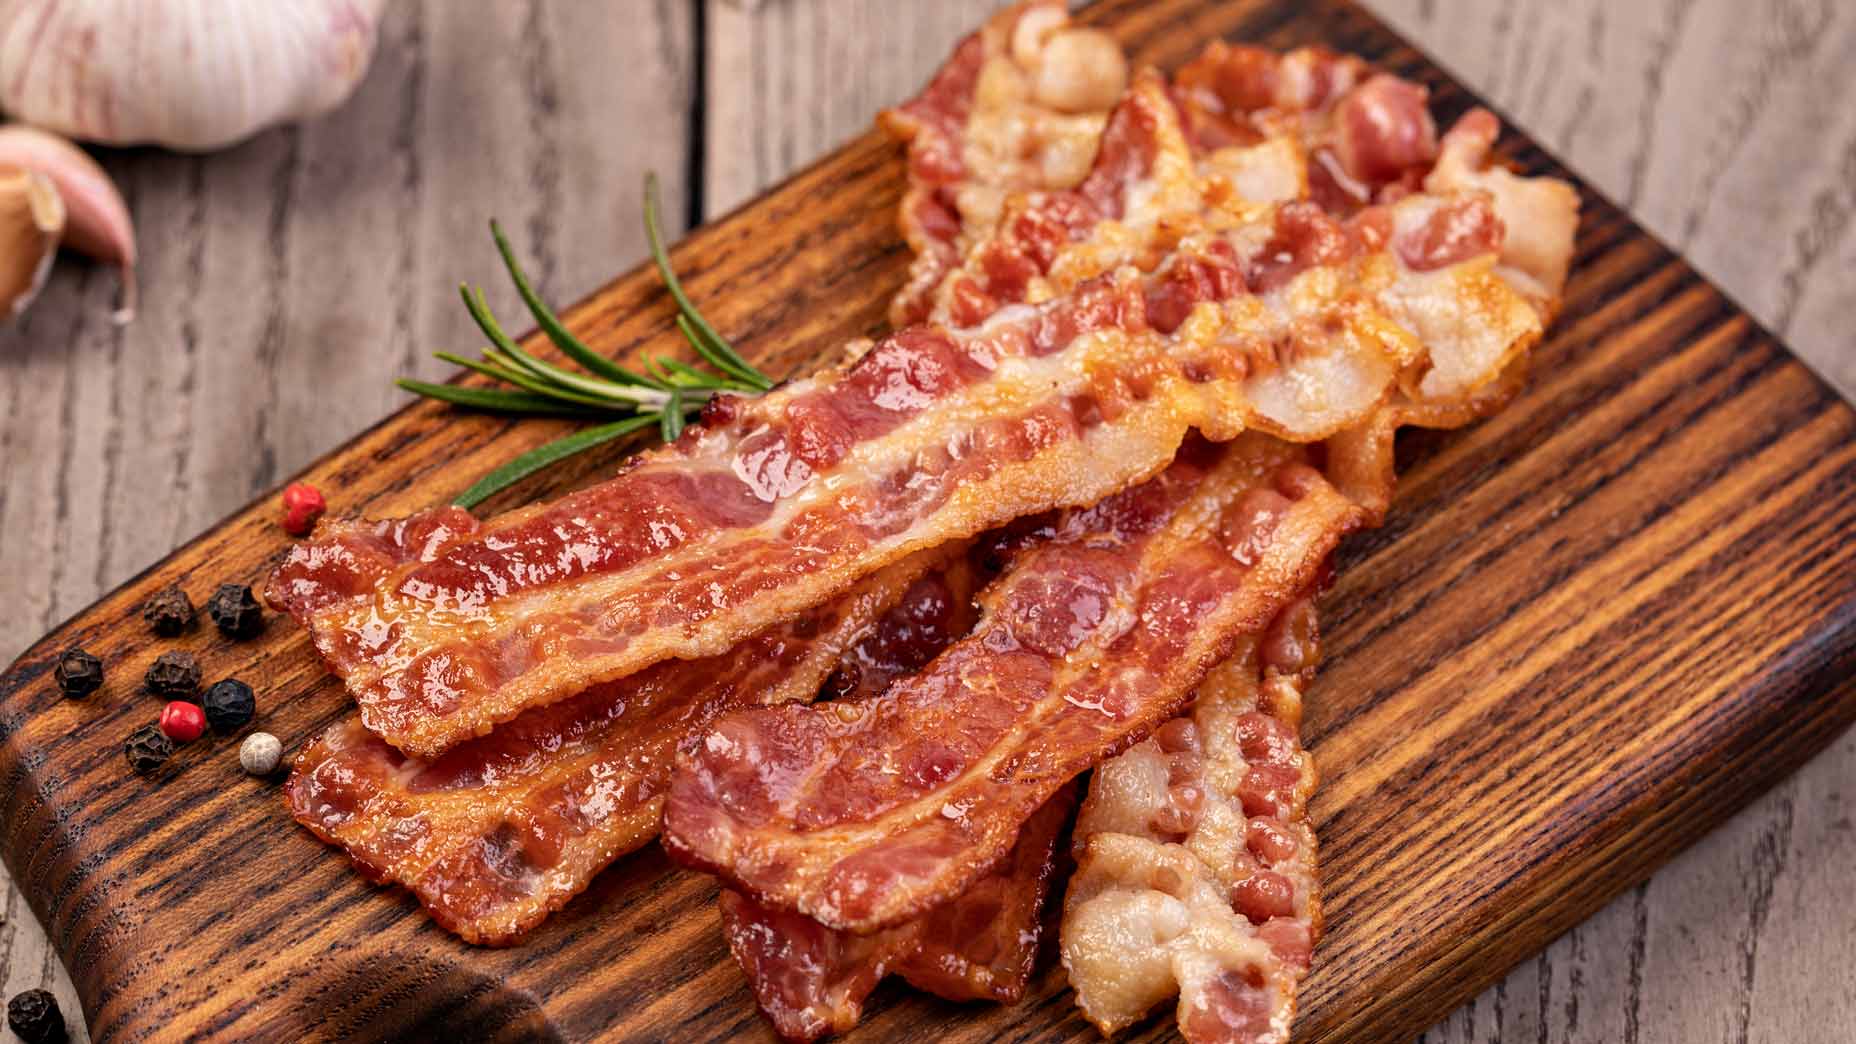 The secret to making perfect bacon, according to a golf-club chef